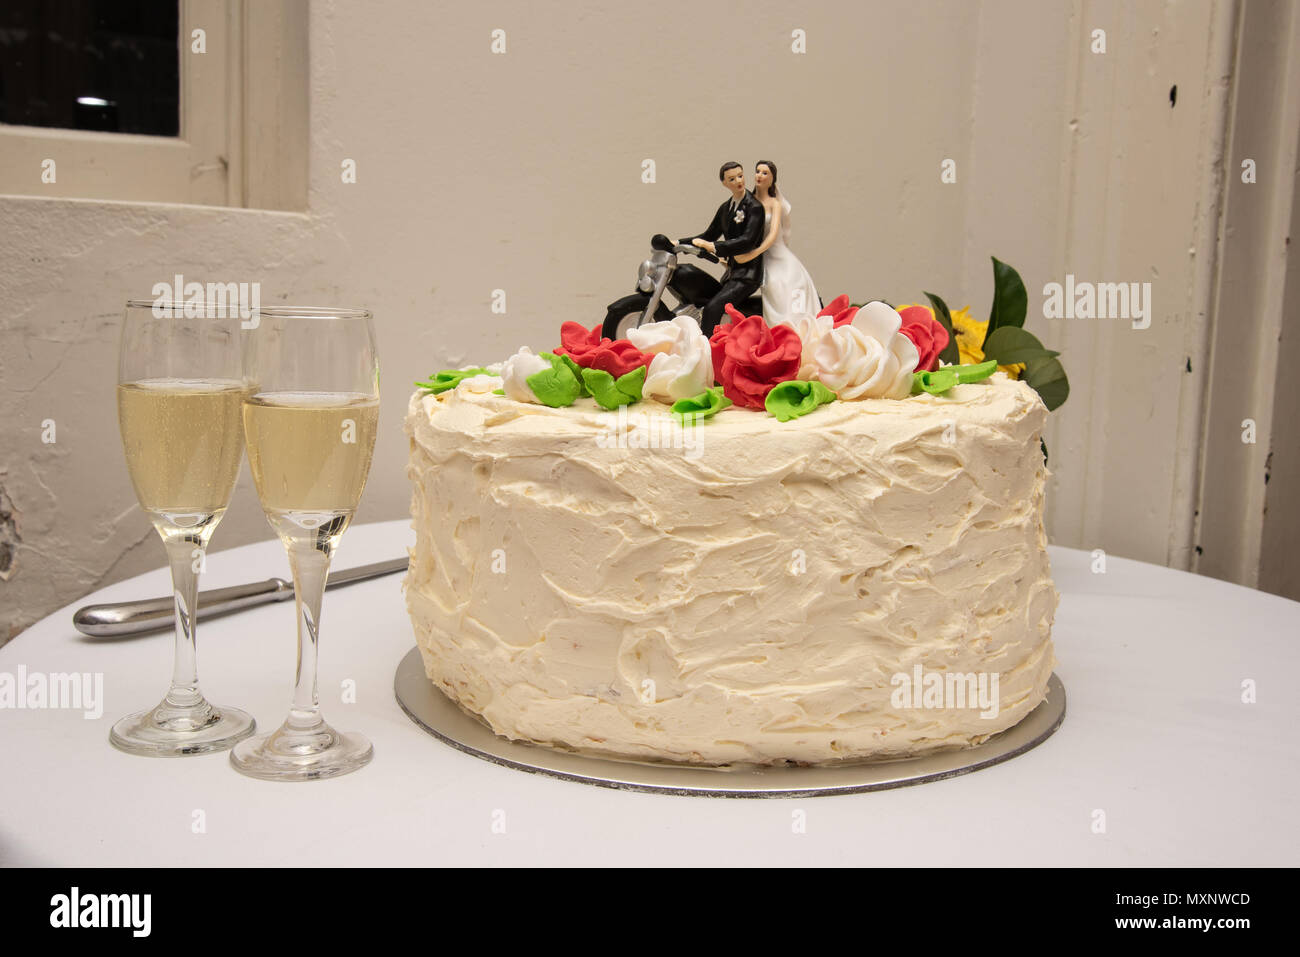 Cake topper: Bride and groom sitting on a motorcycle Stock Photo